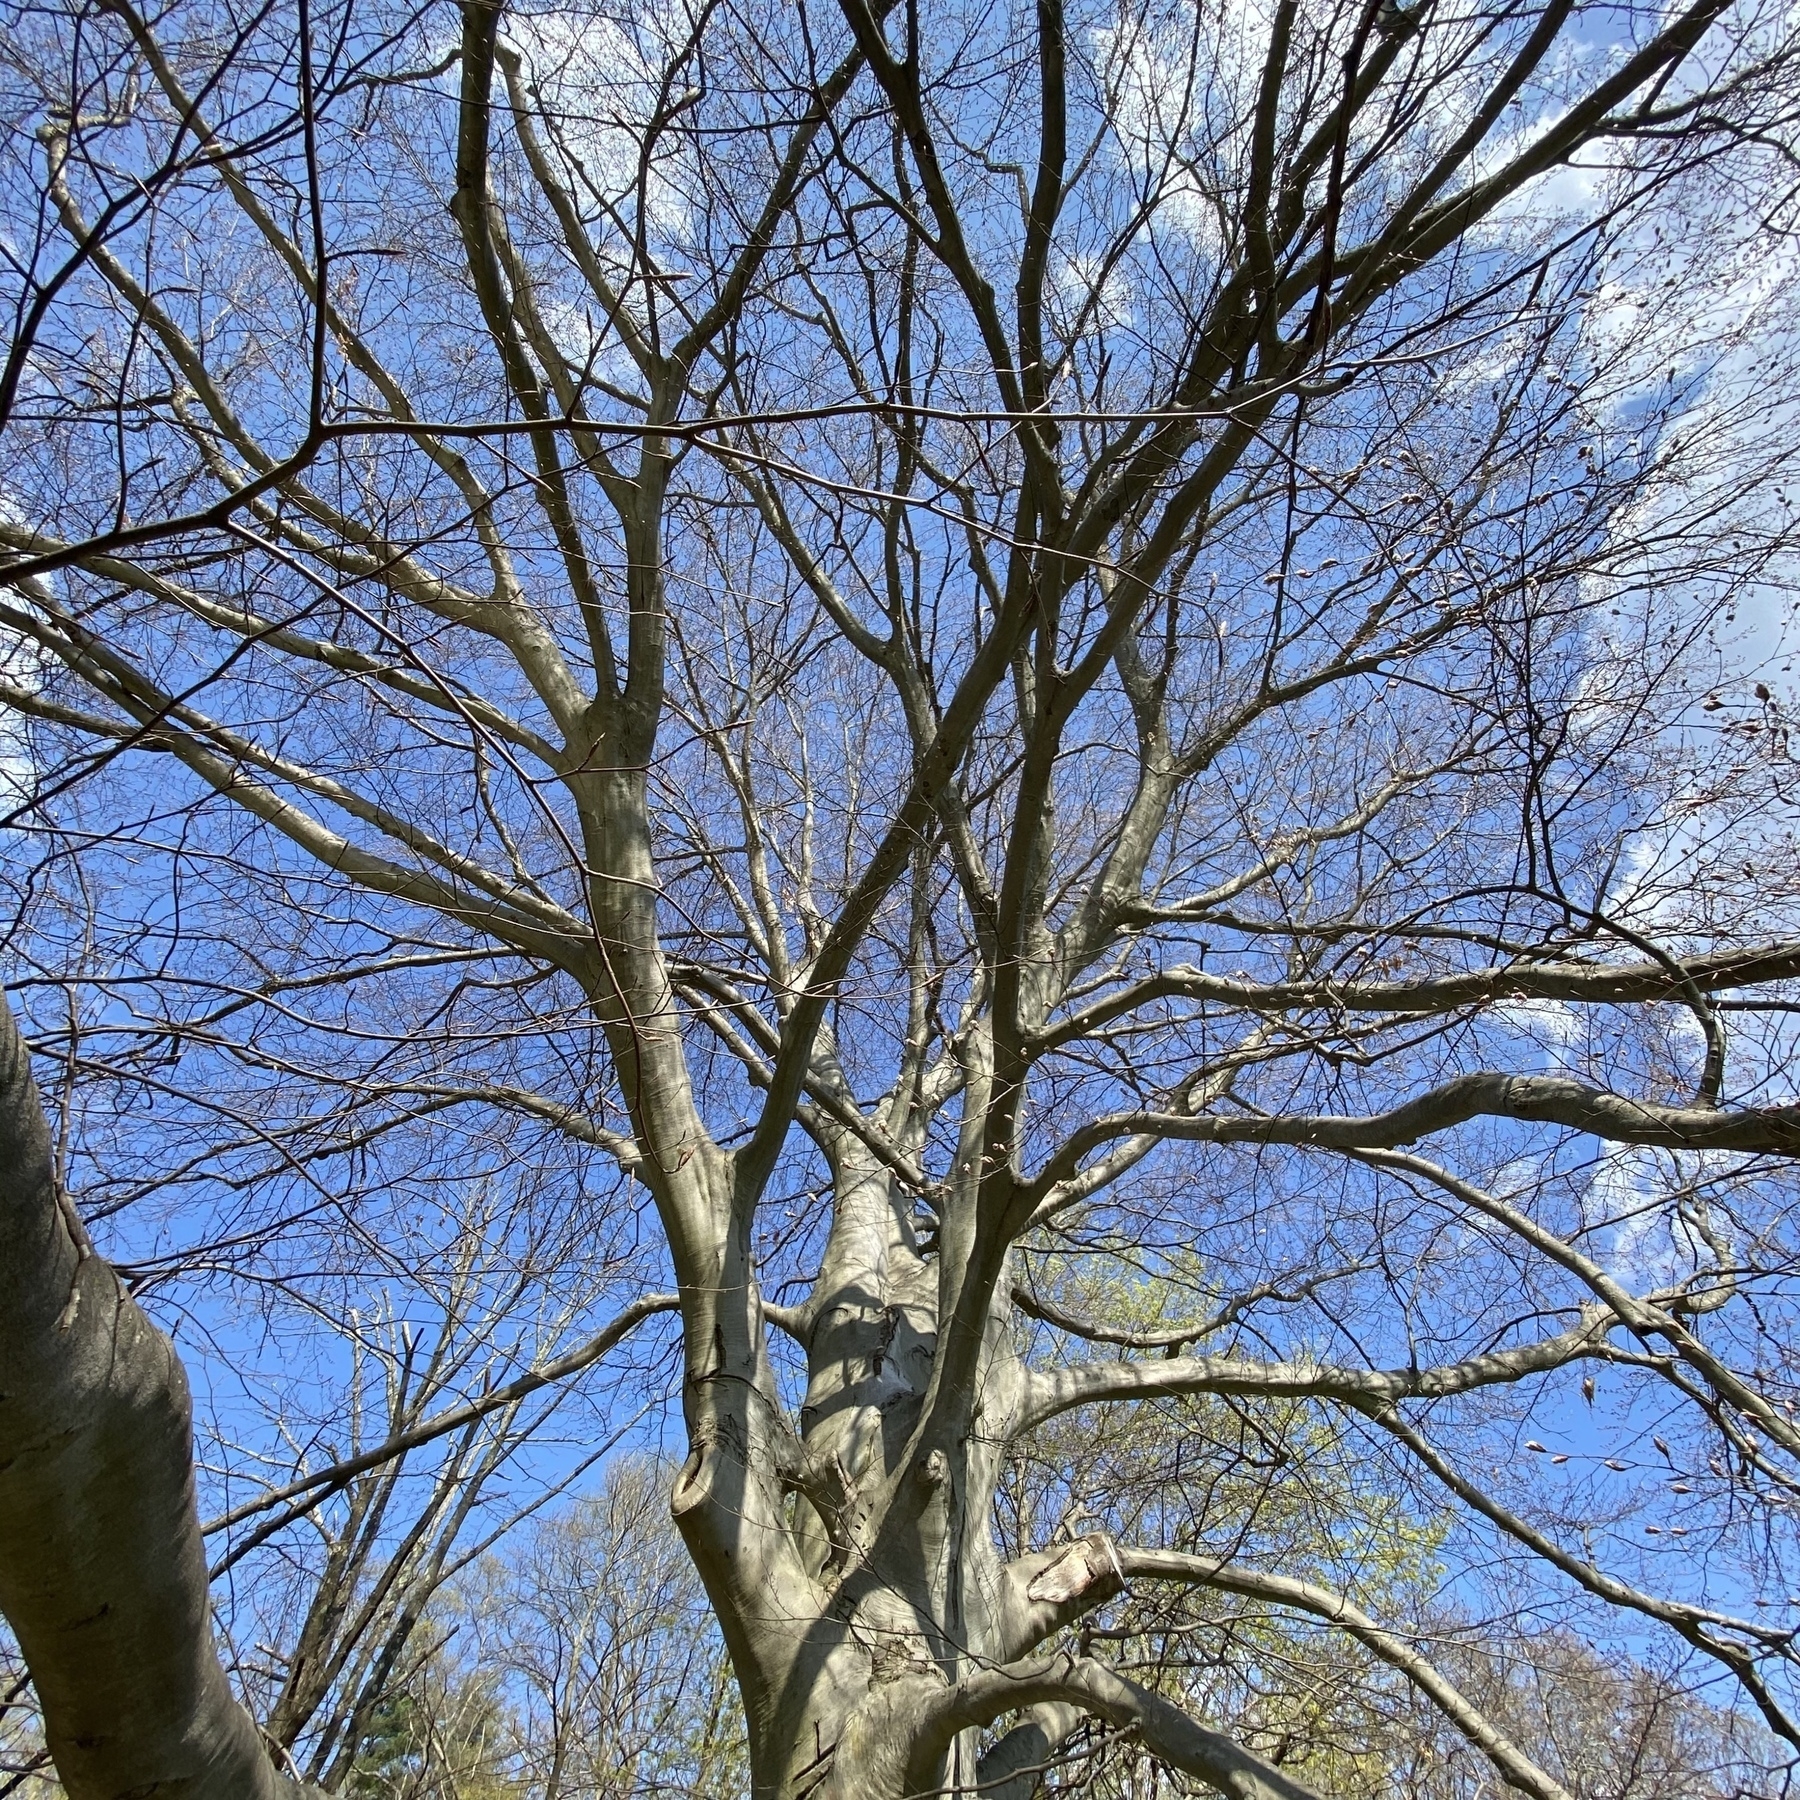 View of a large tree with empty branches just starting to sprout.